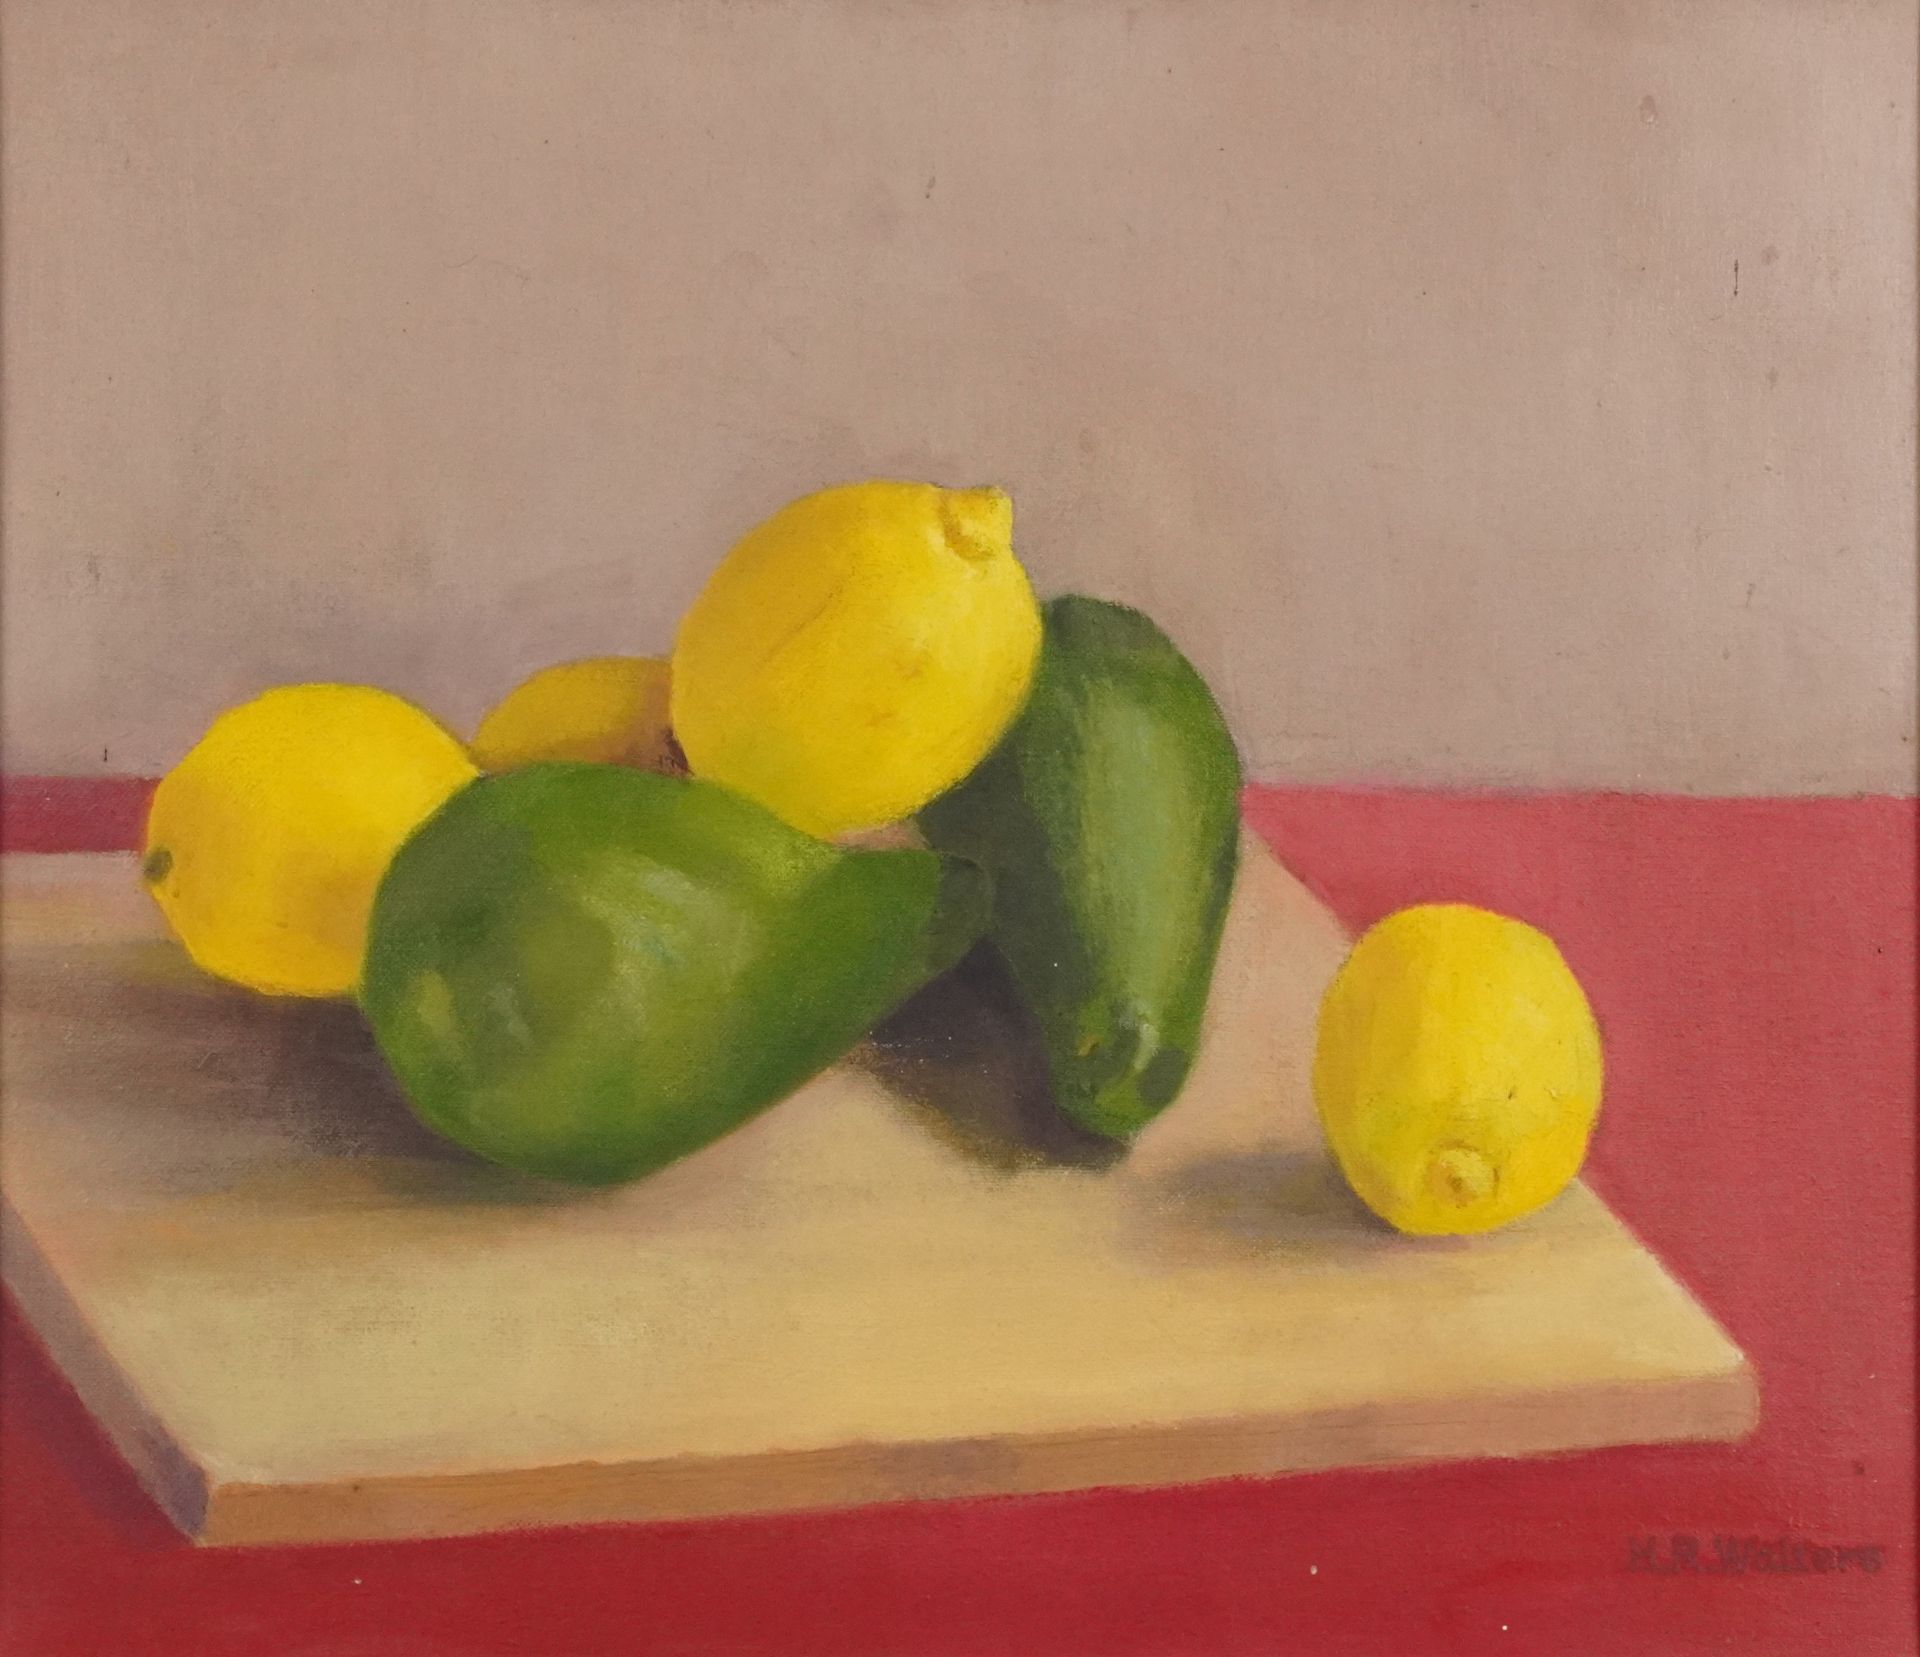 H R Walters - Still life lemons and pears, oil on canvas, mounted and framed, 40cm x 34.5cm